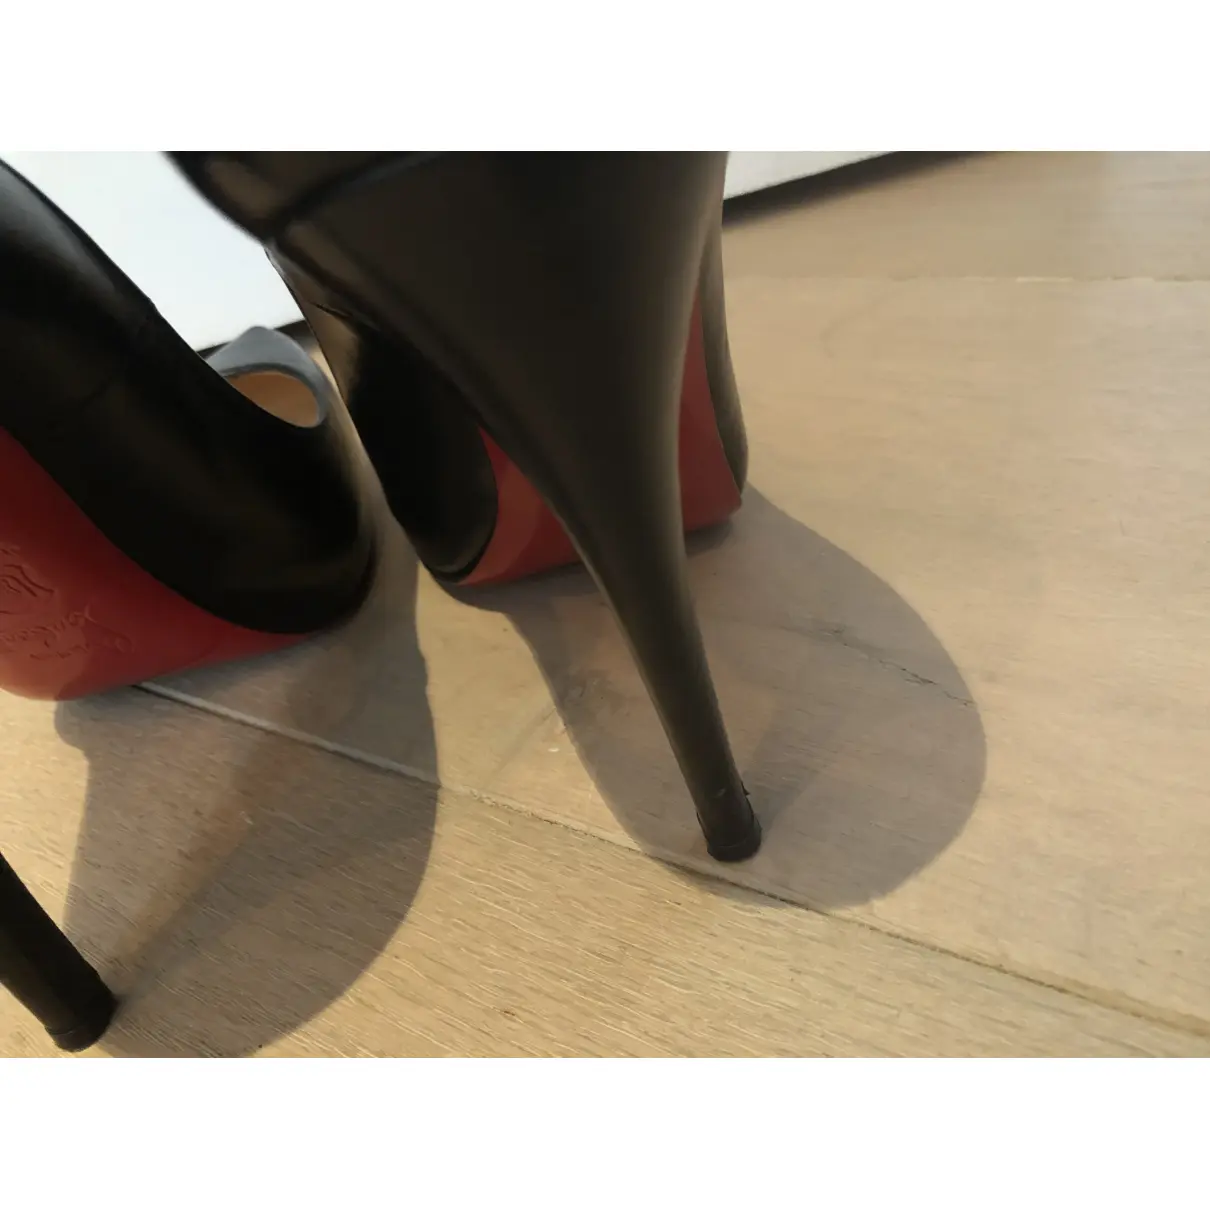 Pigalle Plato leather heels Christian Louboutin